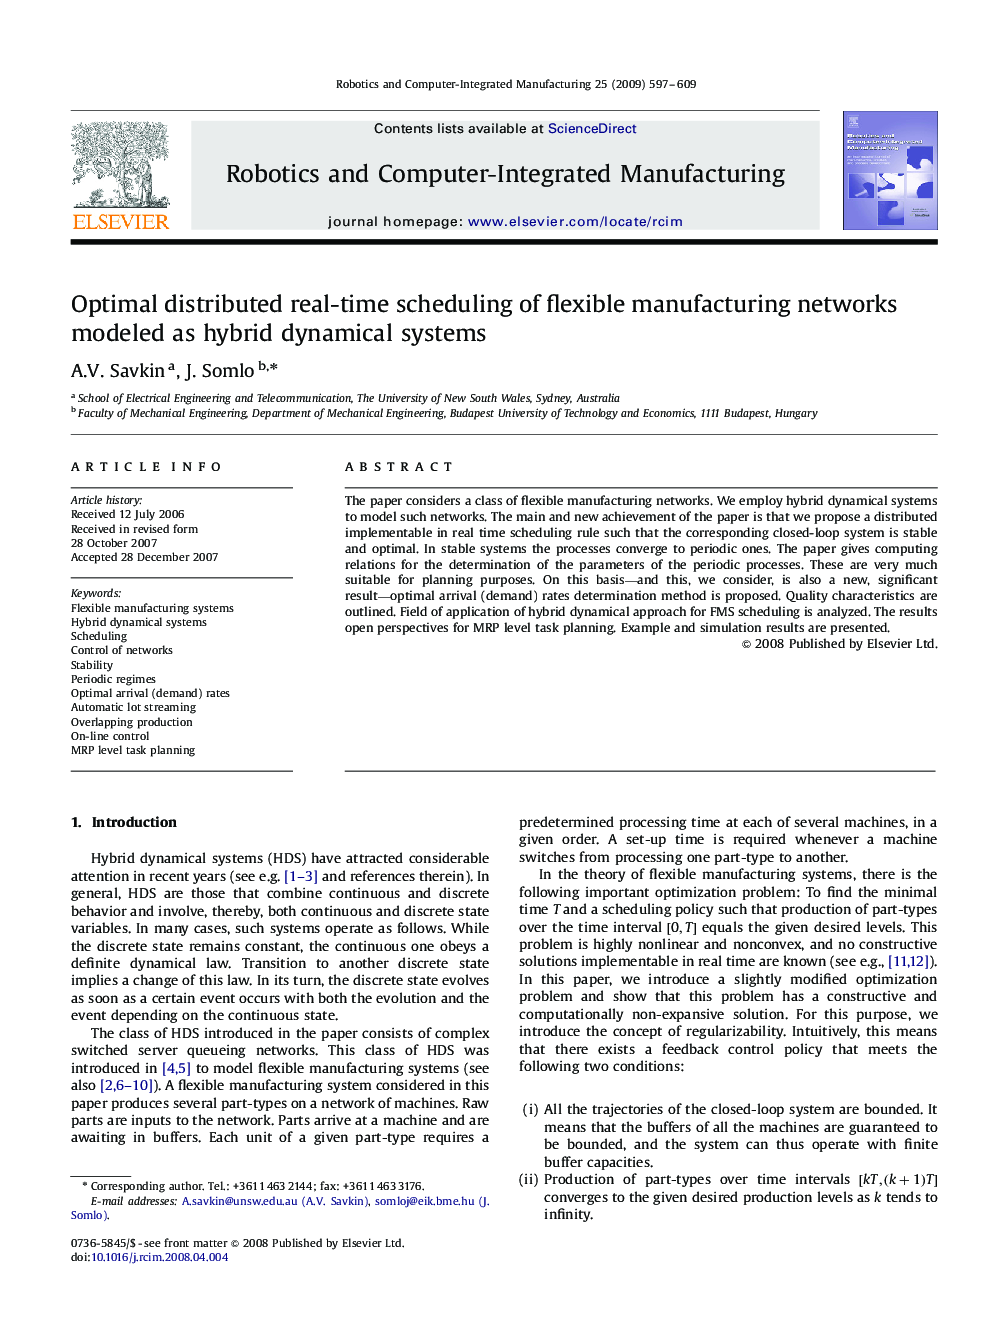 Optimal distributed real-time scheduling of flexible manufacturing networks modeled as hybrid dynamical systems